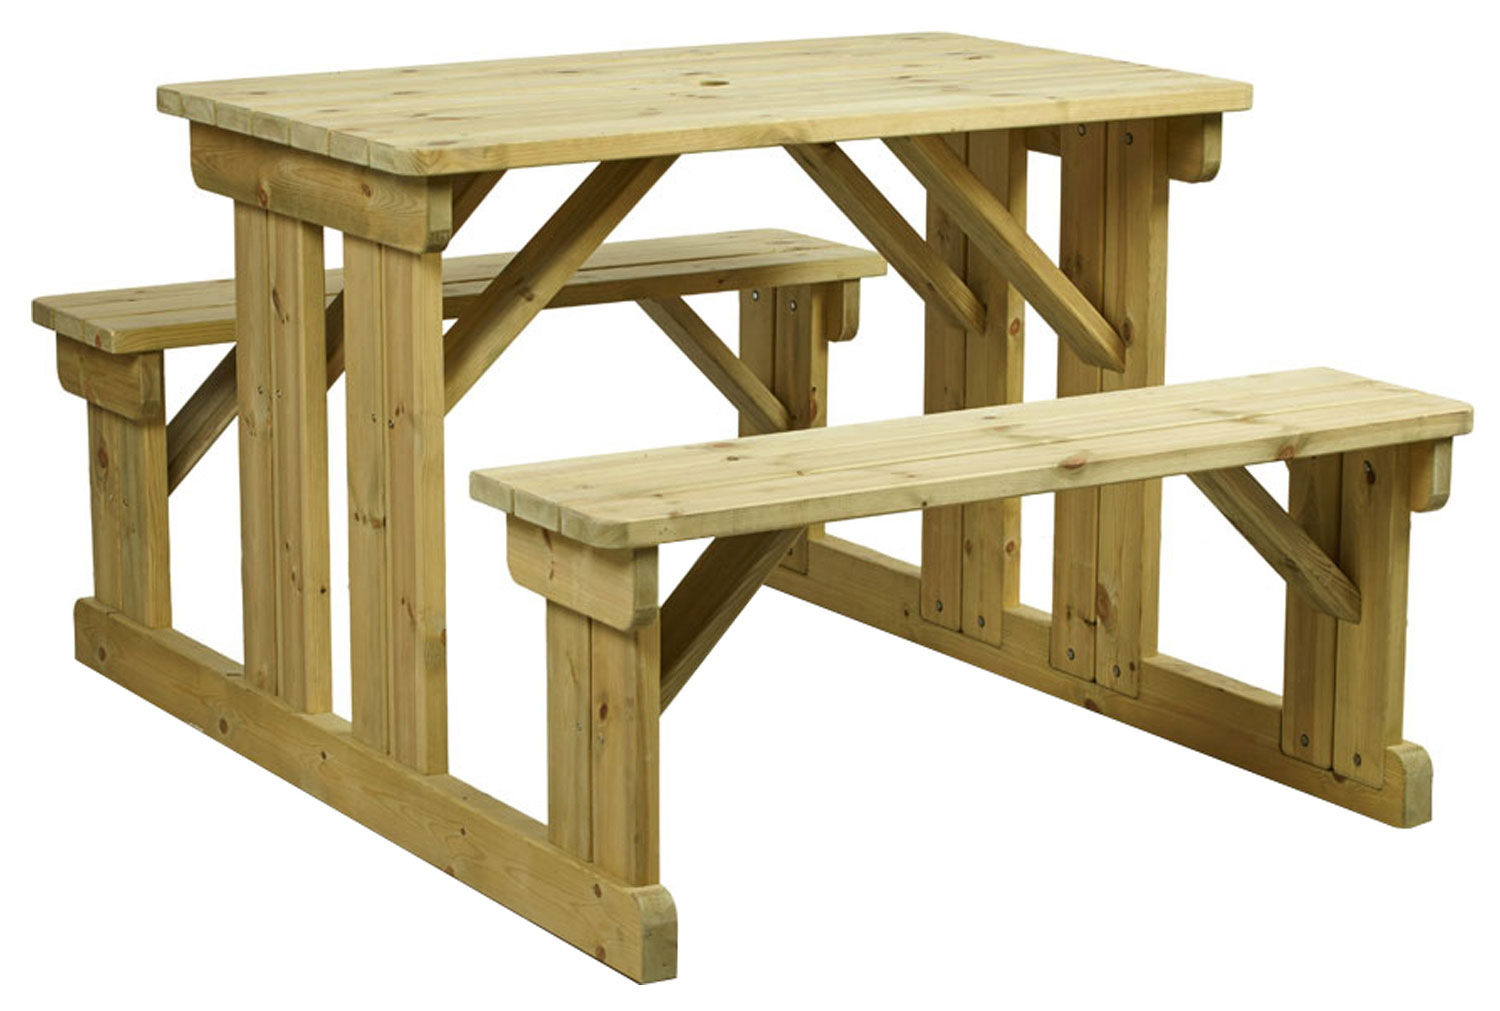 Qty 2 - Nyora Picnic Table, 6 Seater